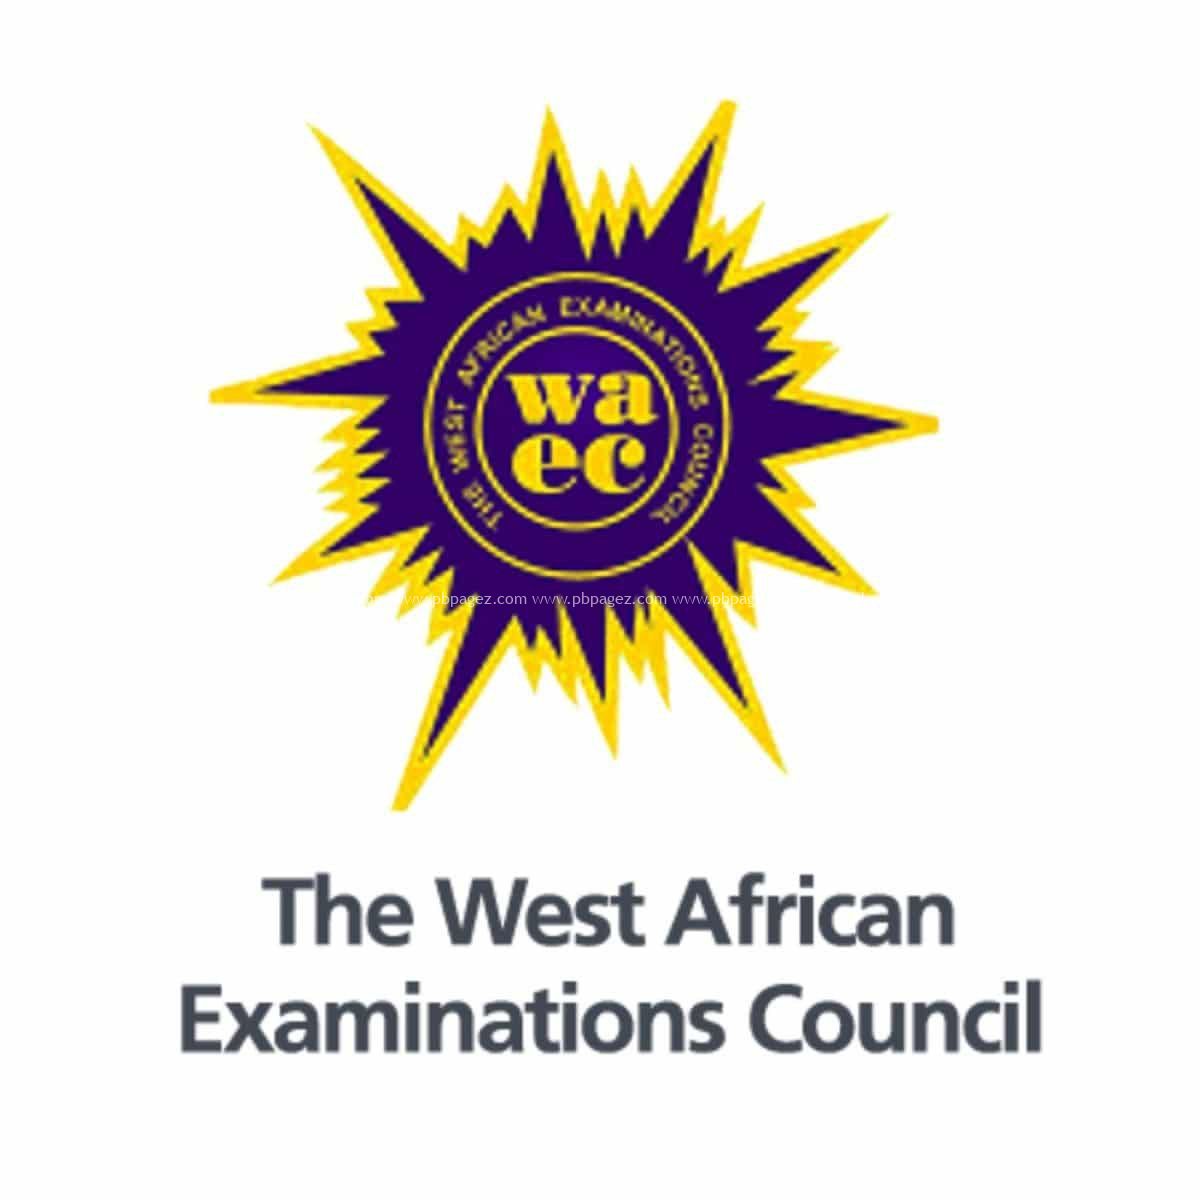 WASSCE (2022) CERIFICATES  HAVE BEEN RELEASED AND ARE AVAILABLE FOR COLLECTION